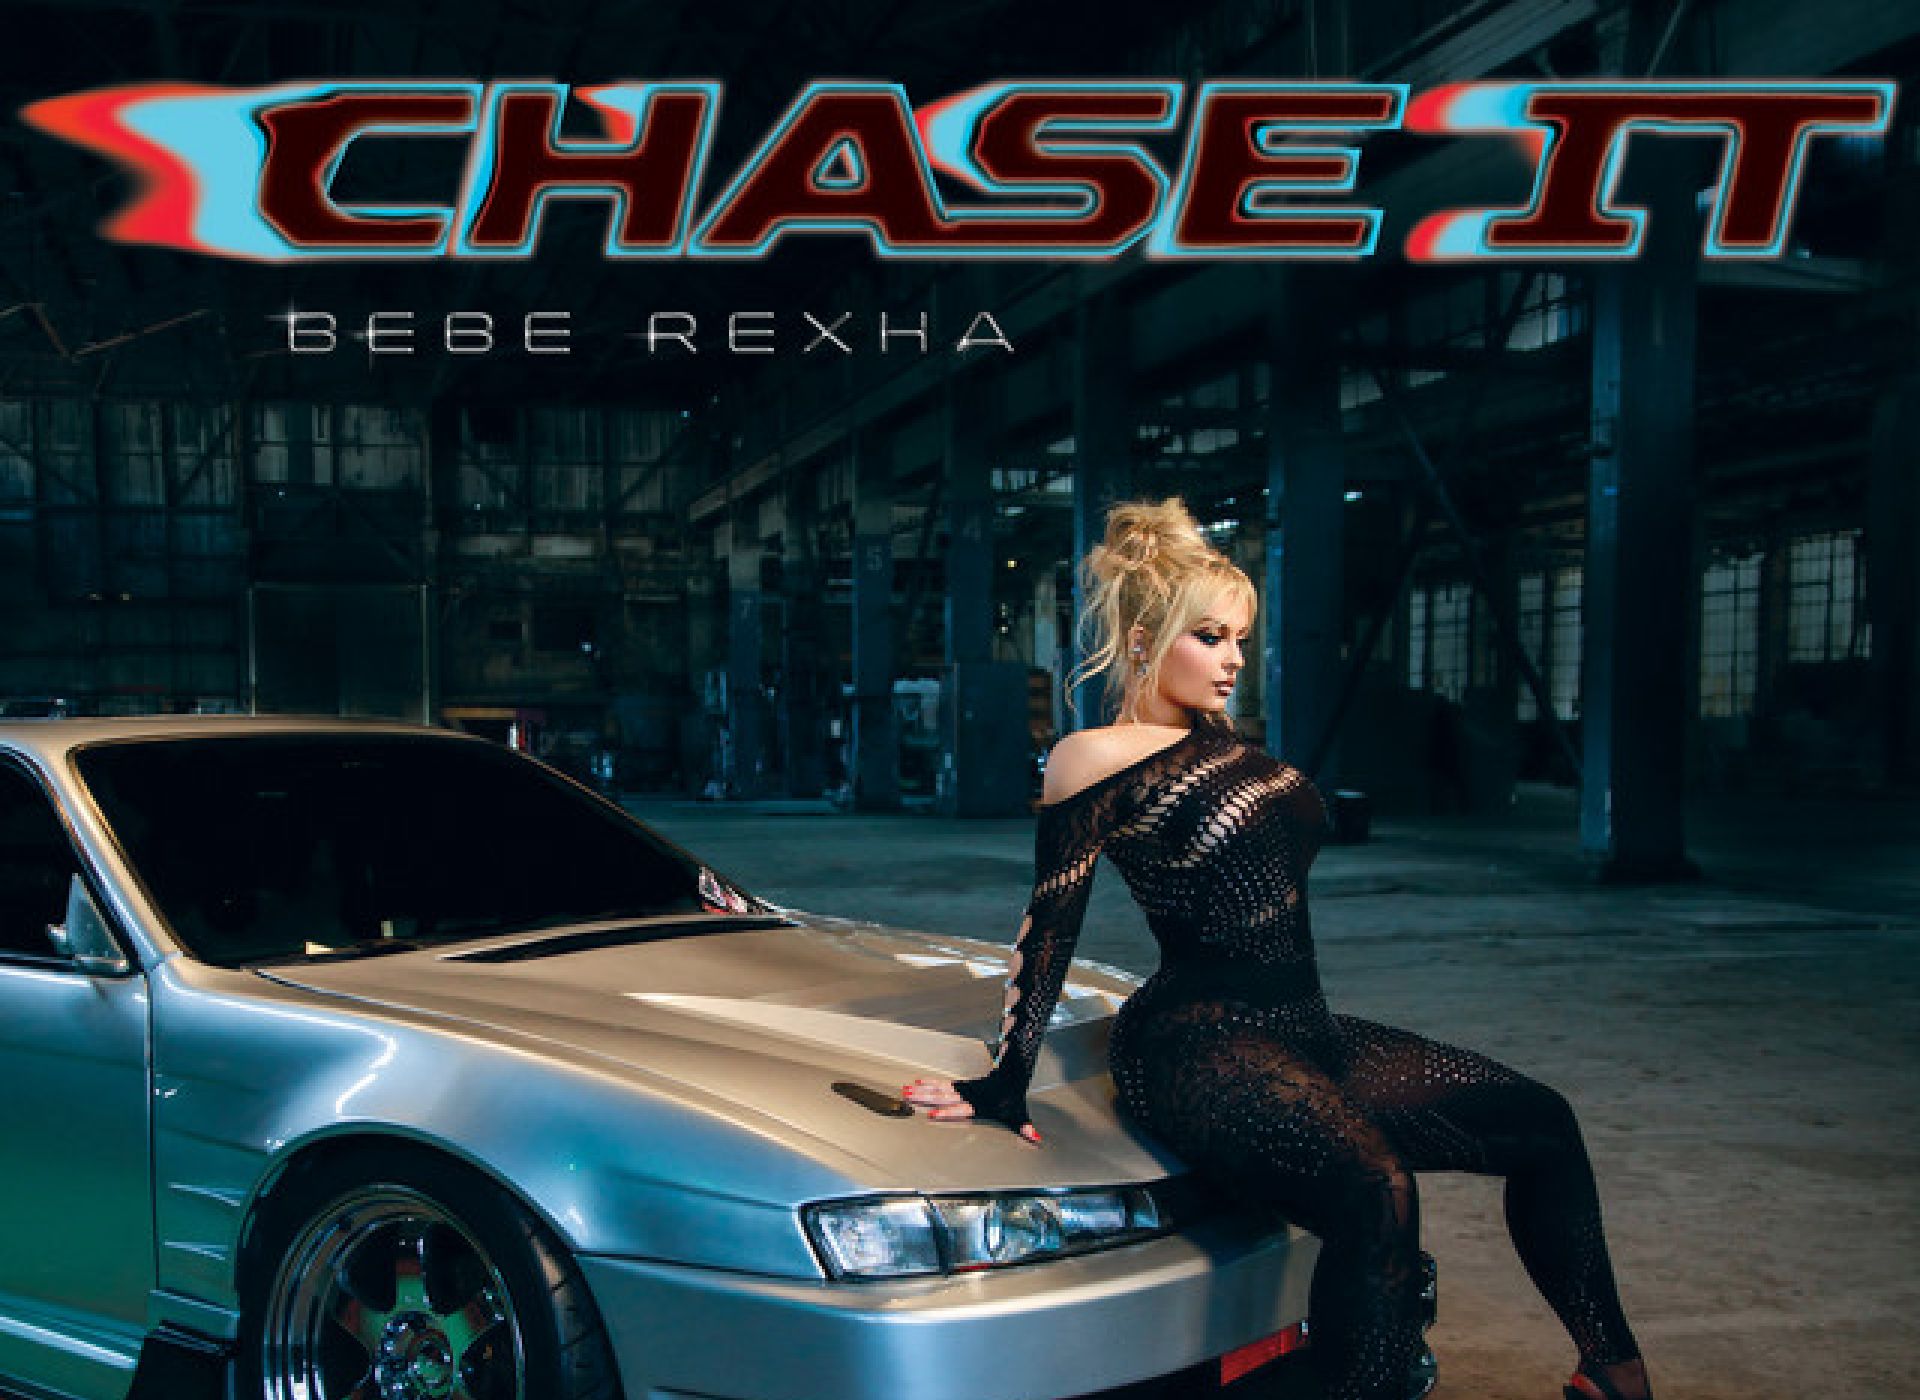 4x-GRAMMY NOMINATED SUPERSTAR BEBE REXHA BRINGS THE ENERGY WITH NEW SINGLE “CHASE IT (MMM DA DA DA)” – OUT NOW